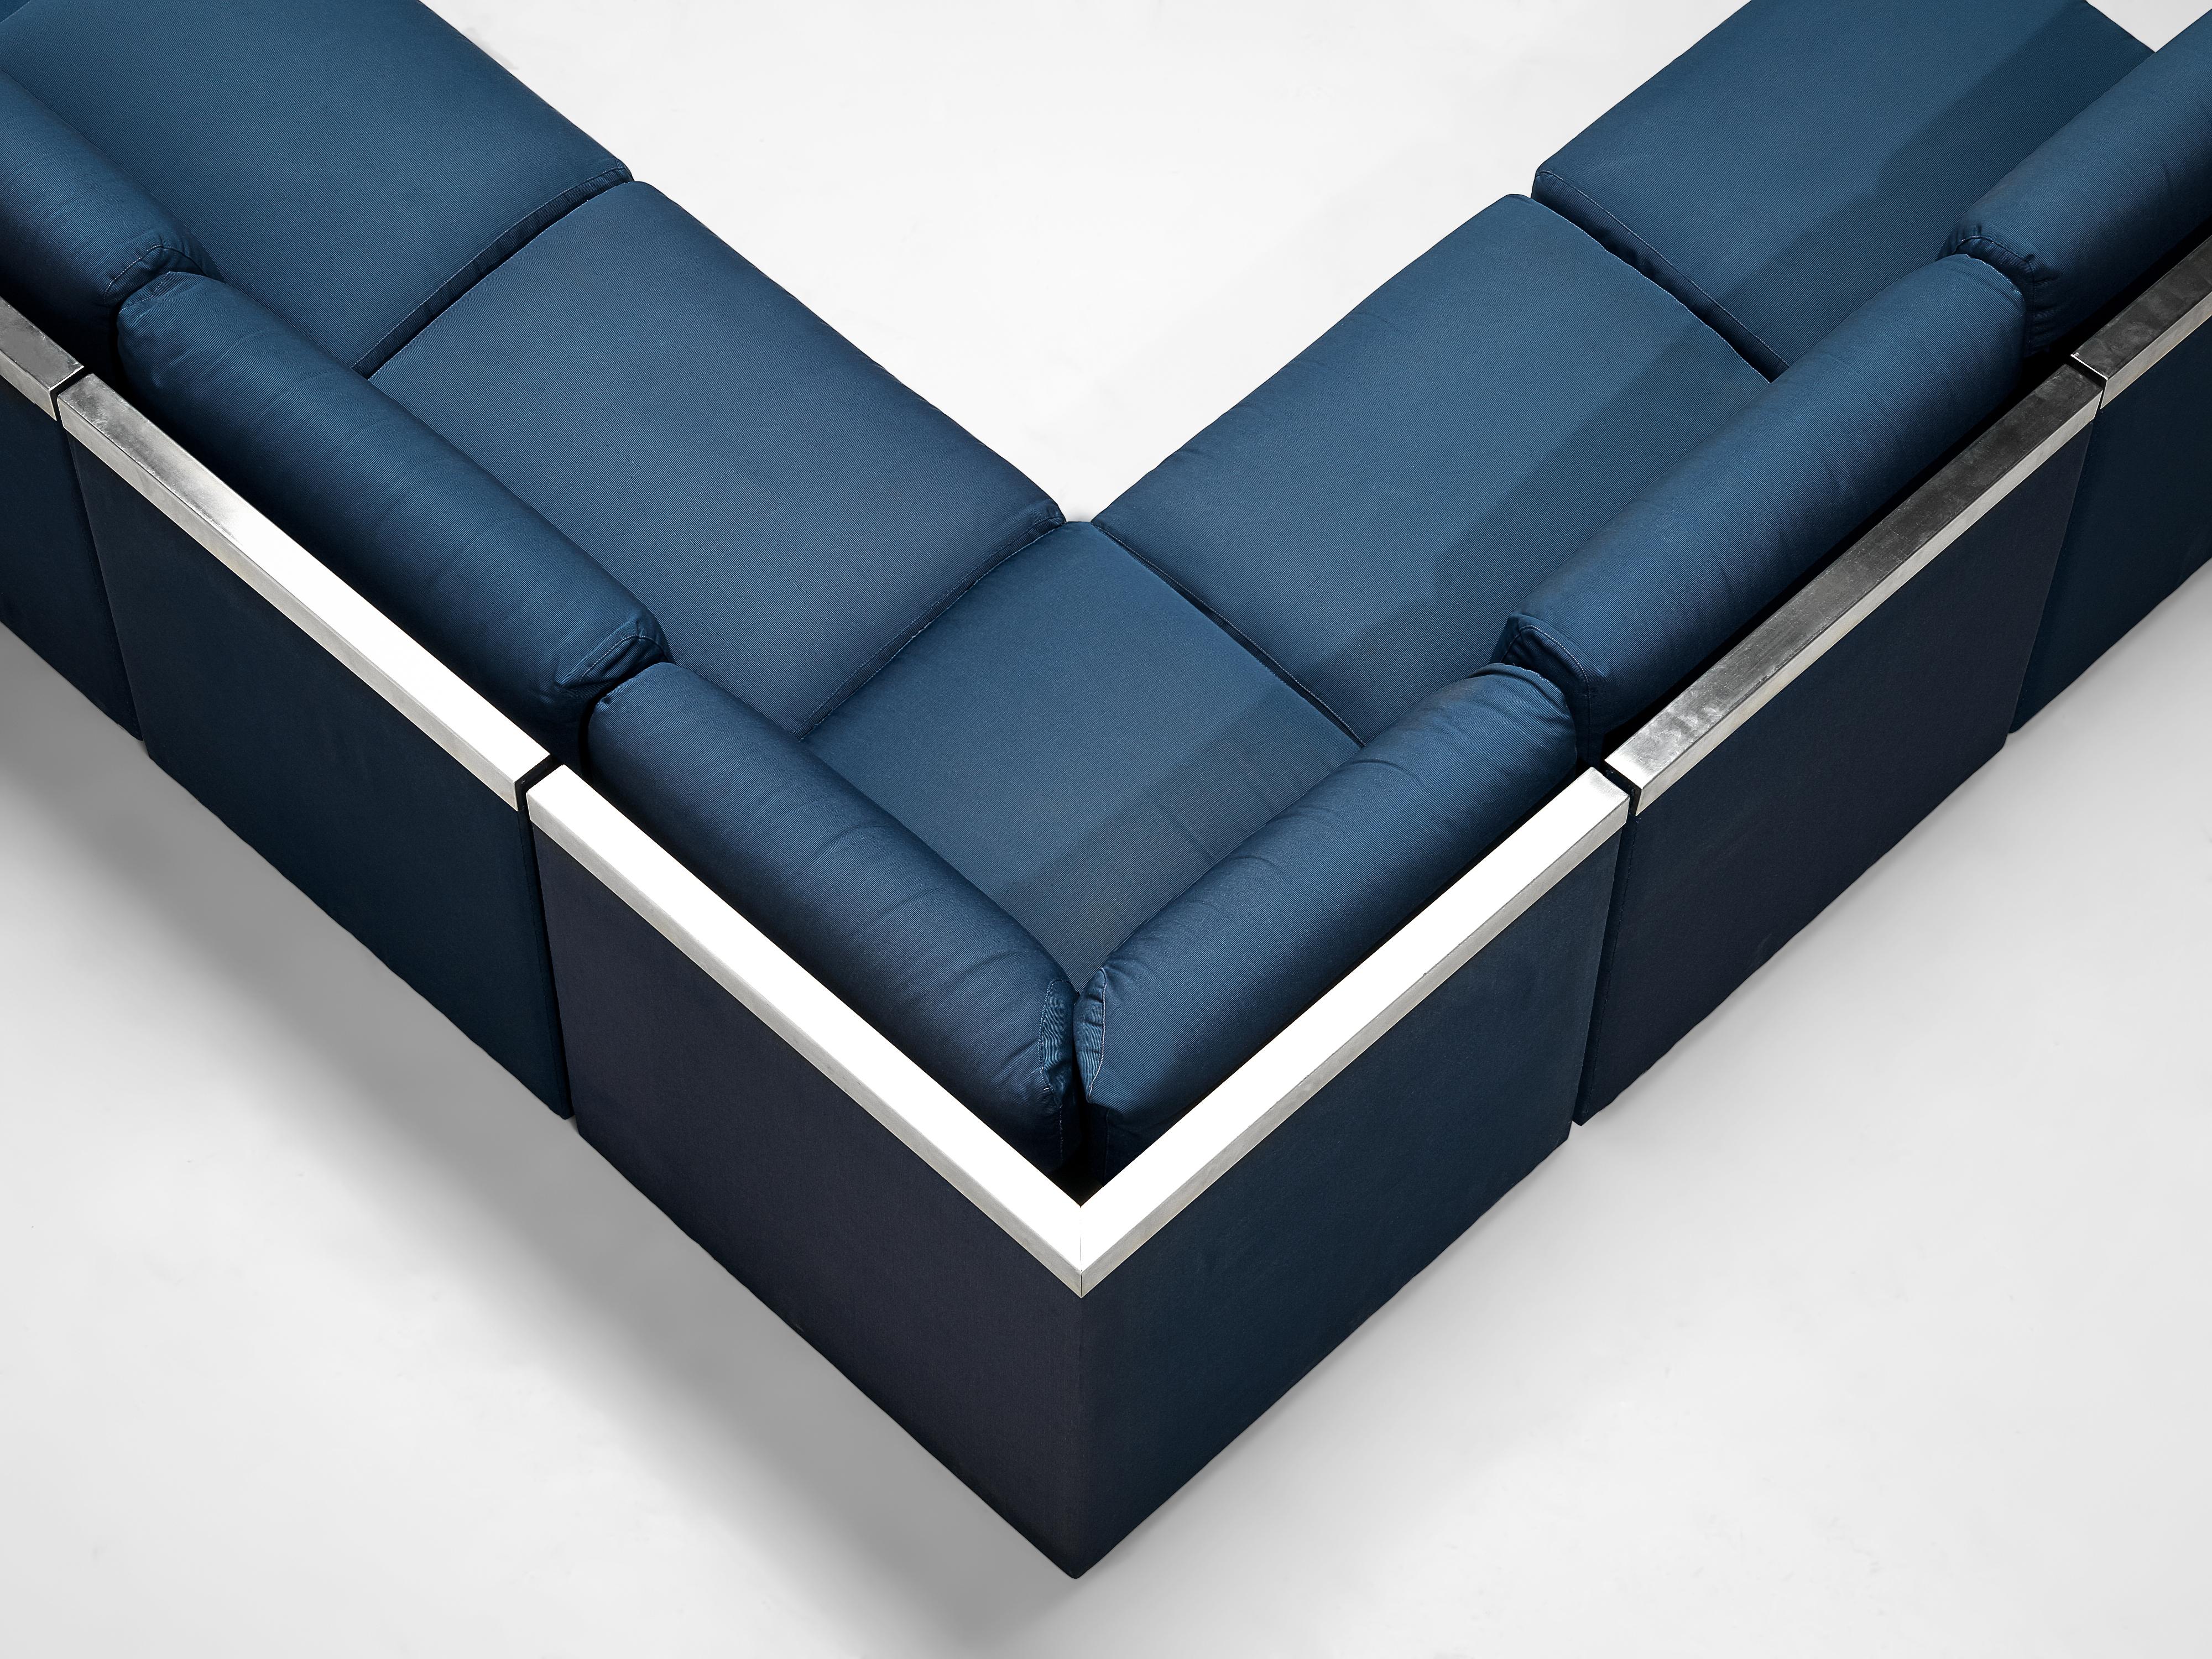 Late 20th Century Large Postmodern Sectional Sofa in Blue Upholstery and Aluminum